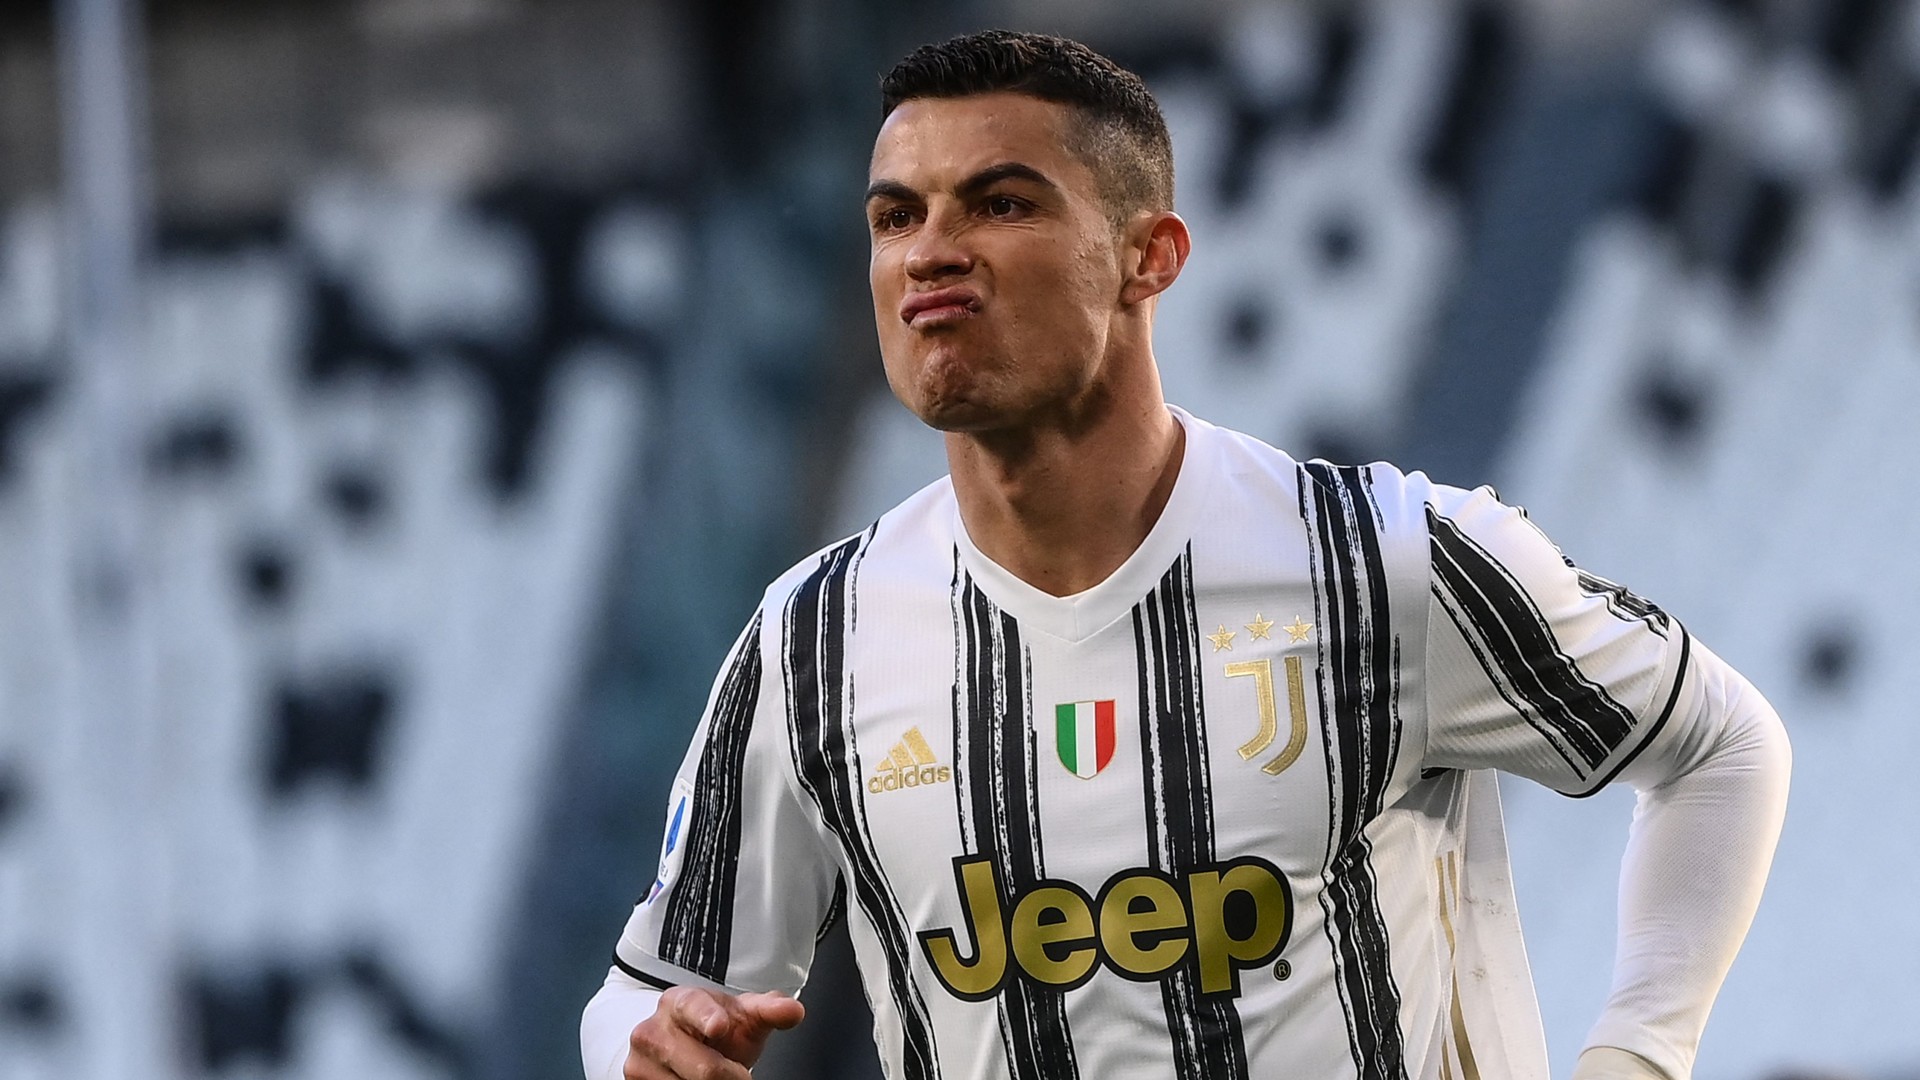 'I don't chase records, records chase me' - Ronaldo says he's left his mark at Juventus as future remains unclear